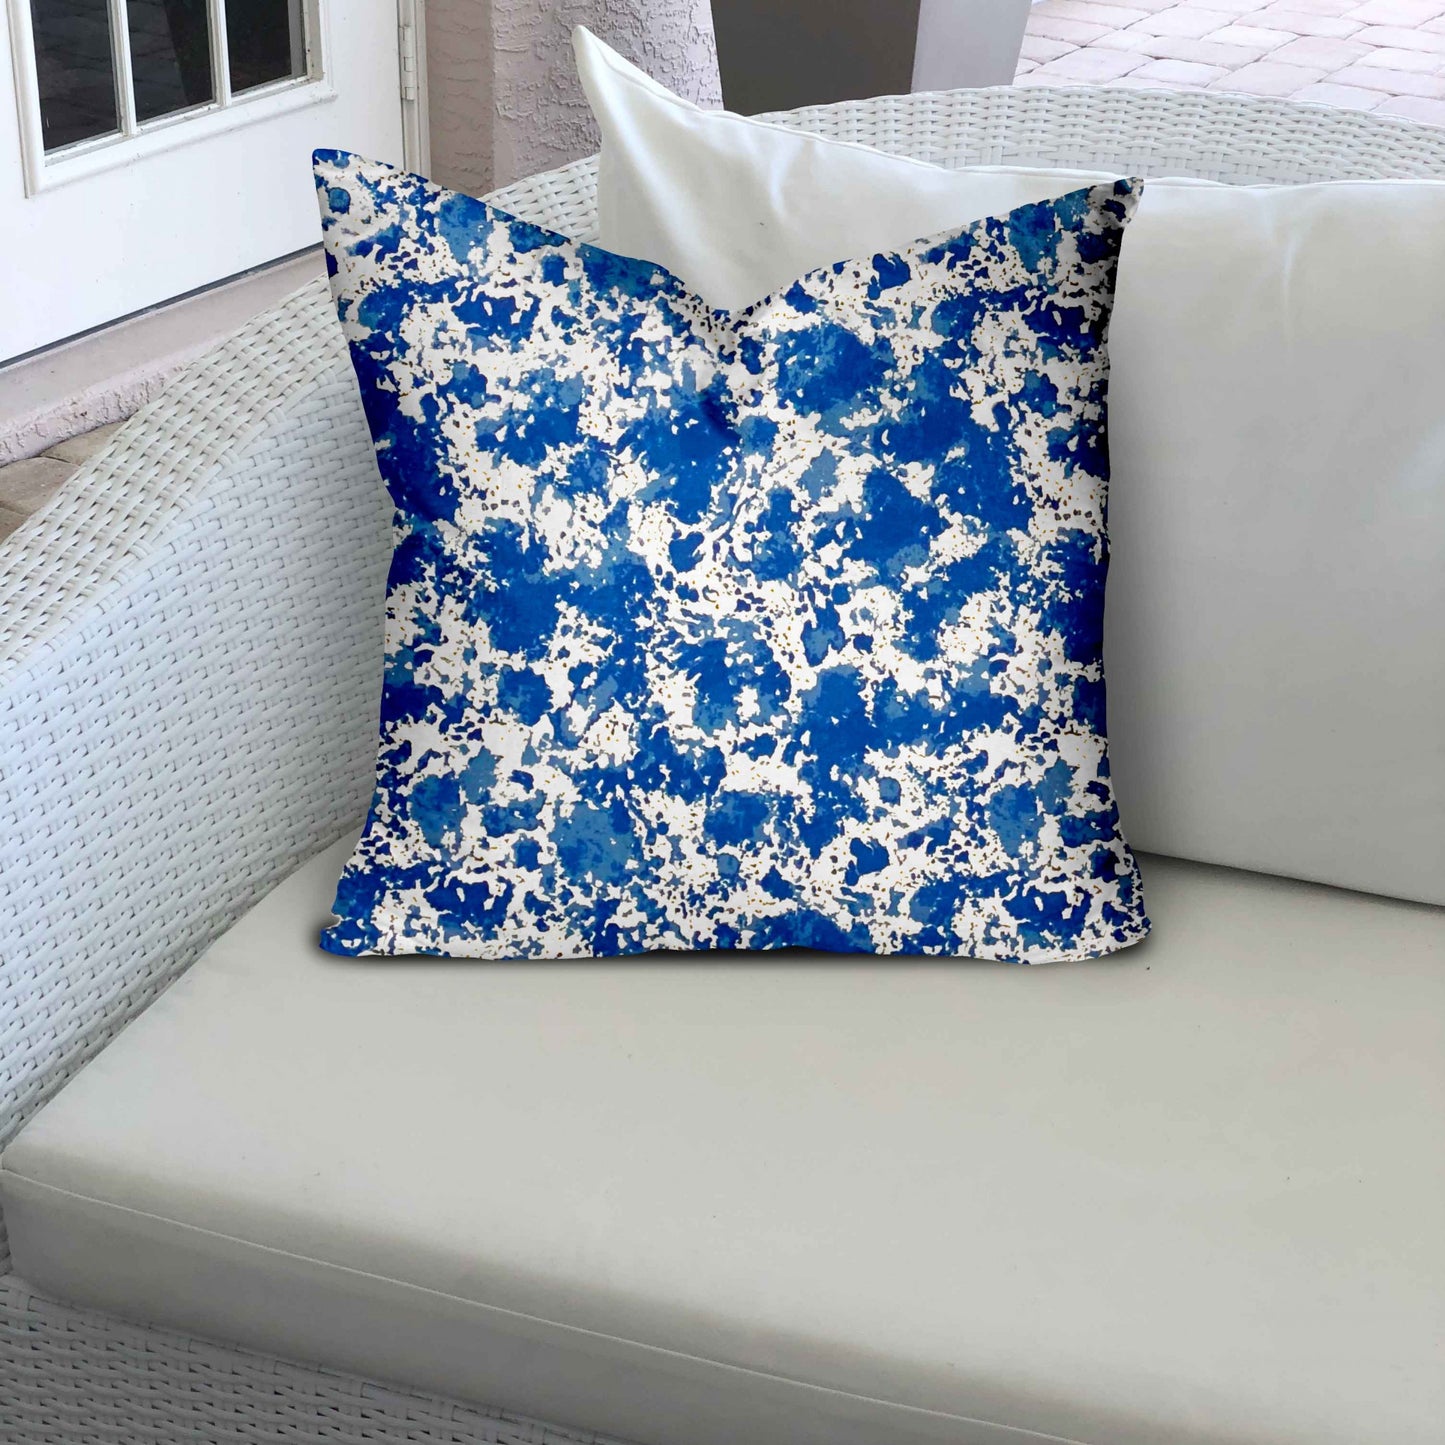 12" X 12" Blue And White Enveloped Coastal Throw Indoor Outdoor Pillow